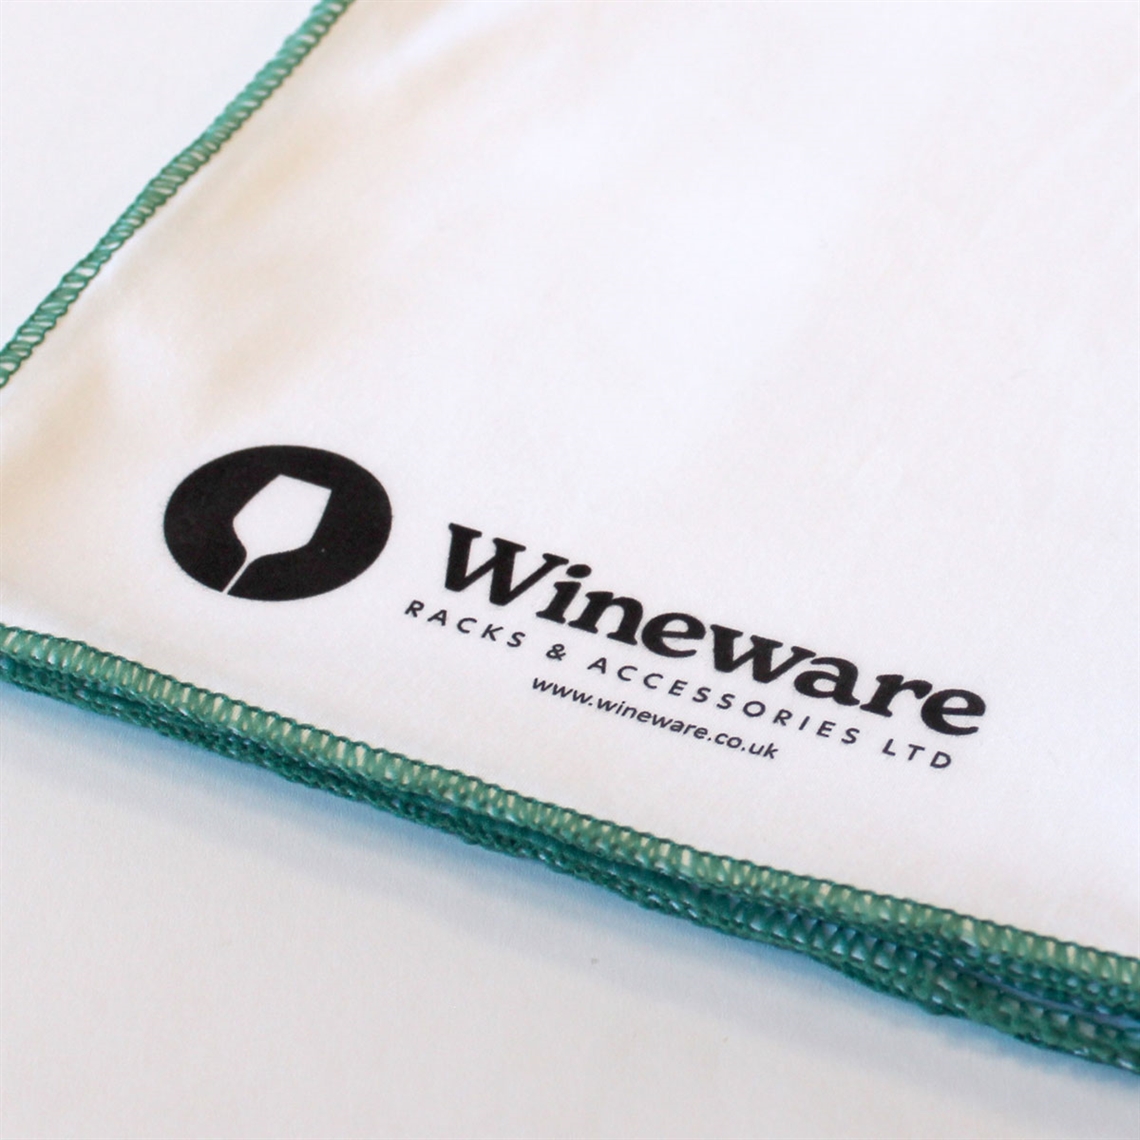 View more ivento from our Wine Glass Cleaning & Accessories range